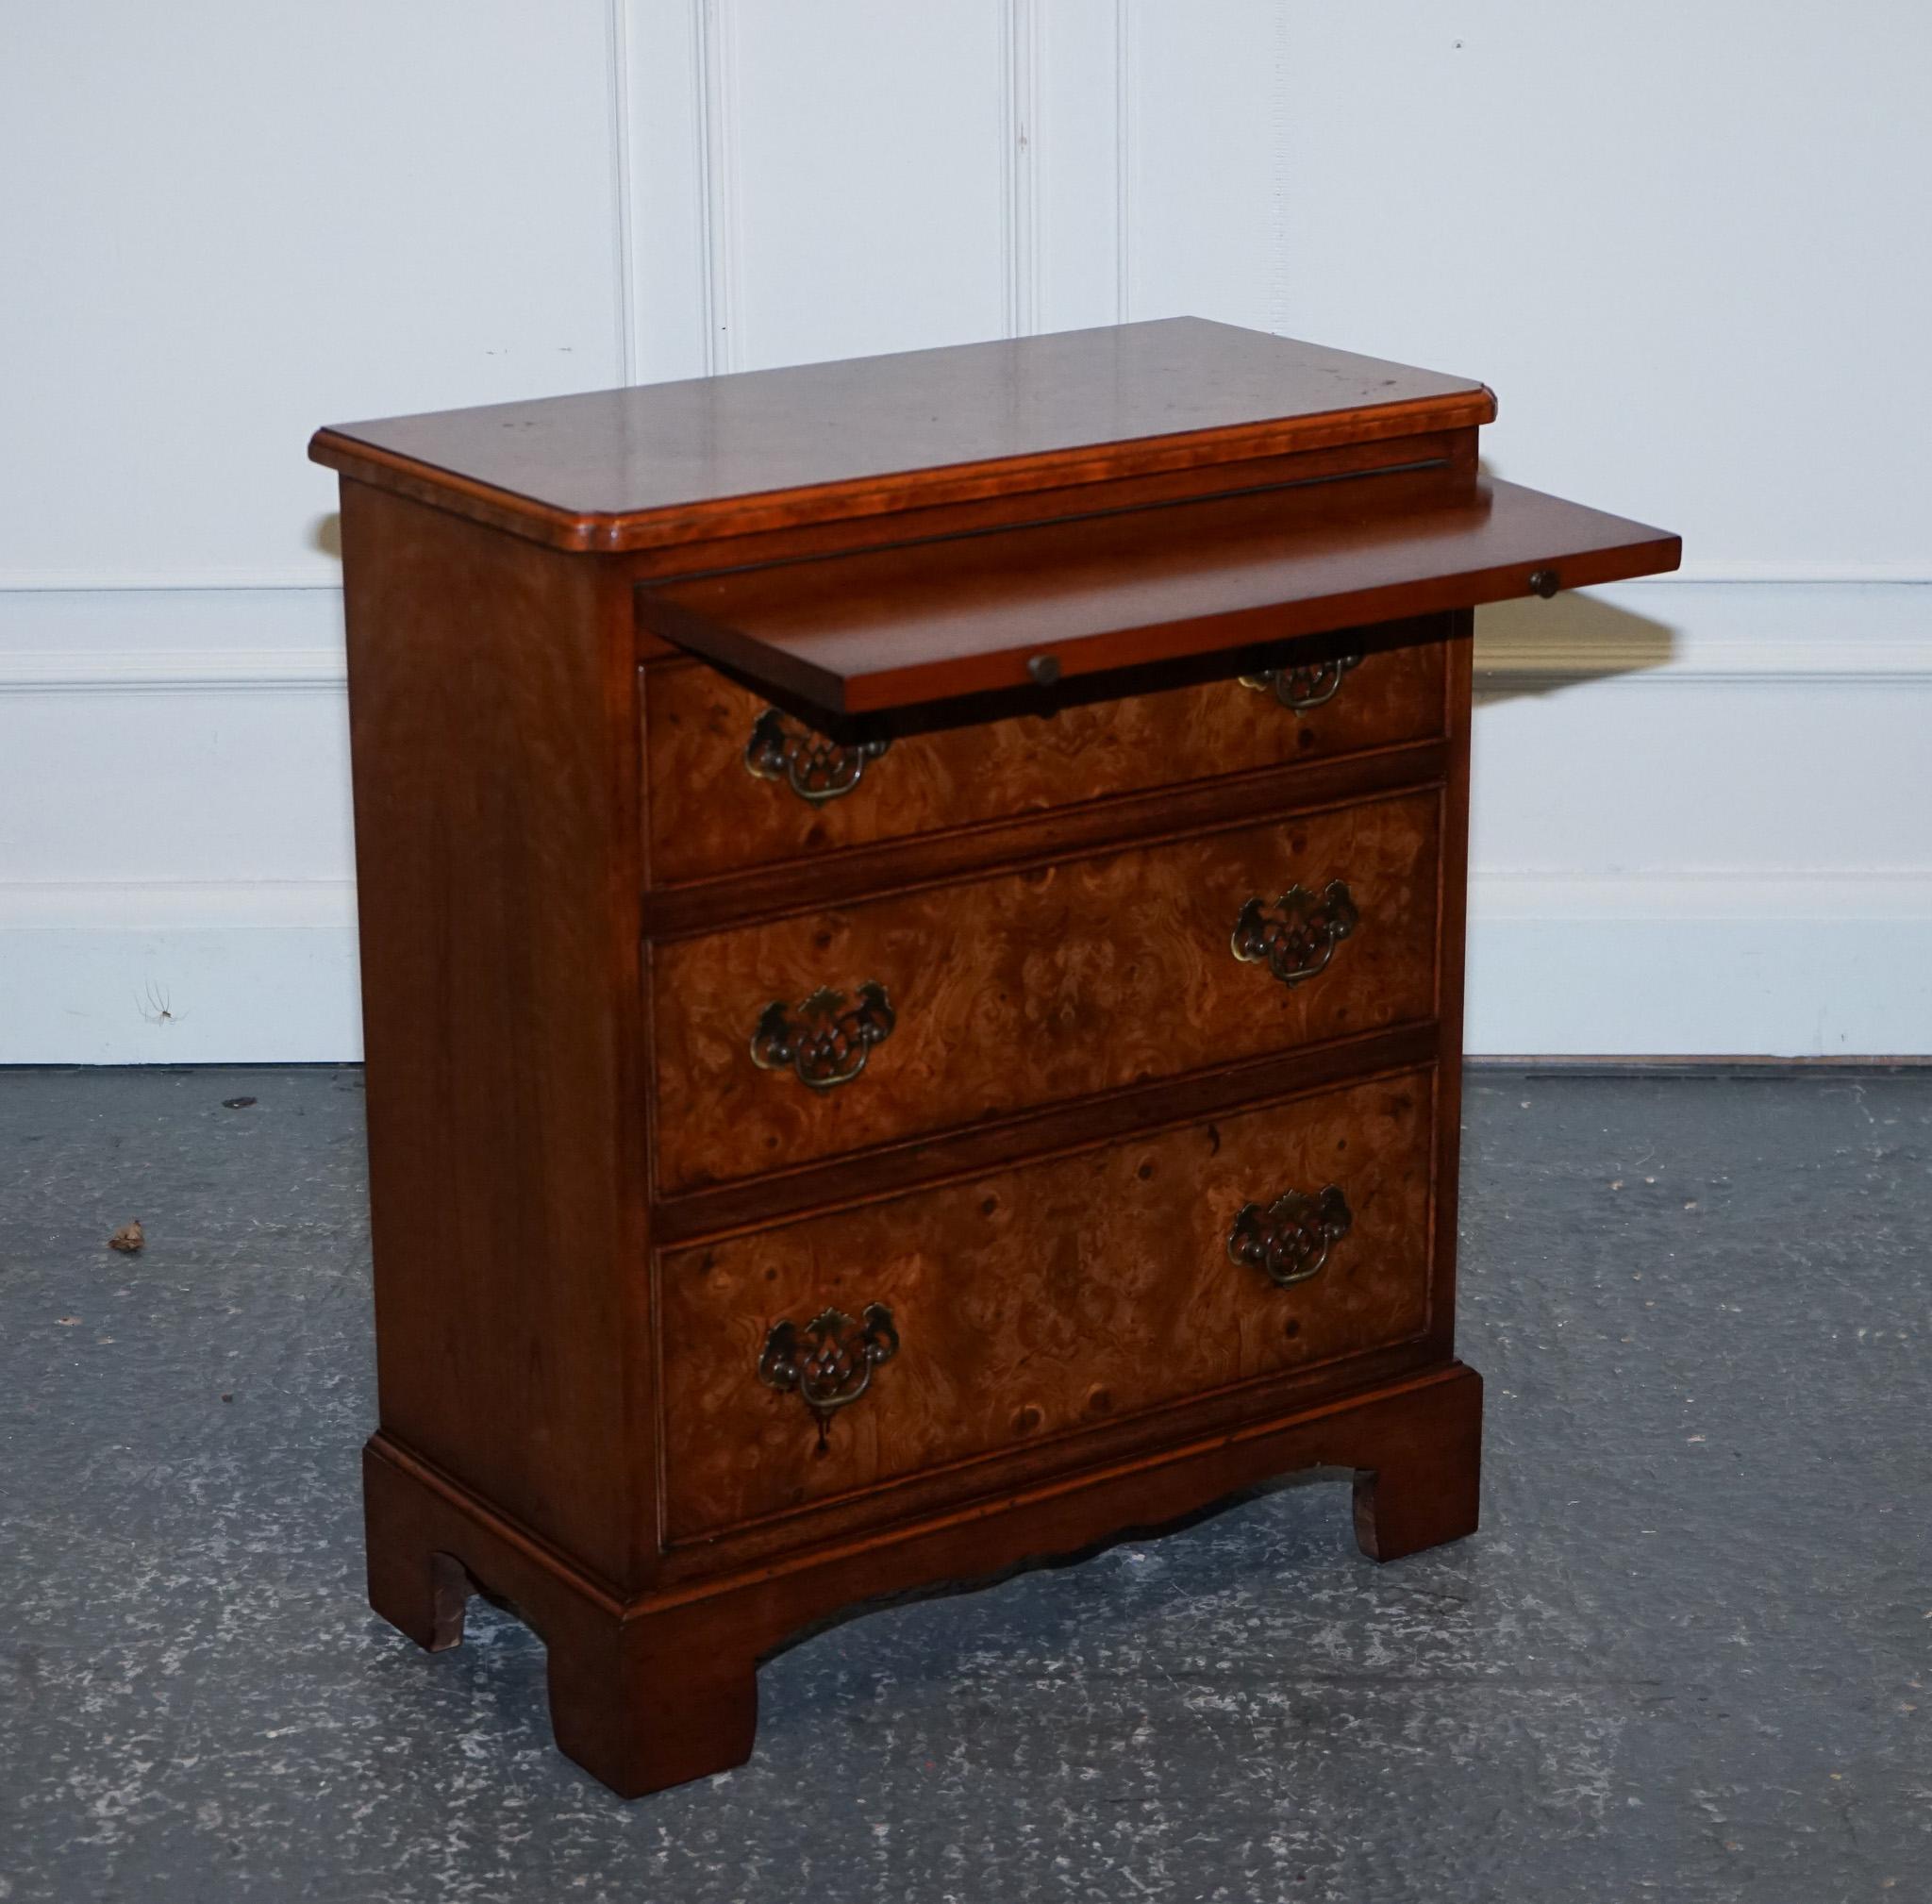 British LOVELY VINTAGE BURR WALNUT BACHERLORS CHEST OF DRAWERS WITH A BUTLER SLiDE For Sale